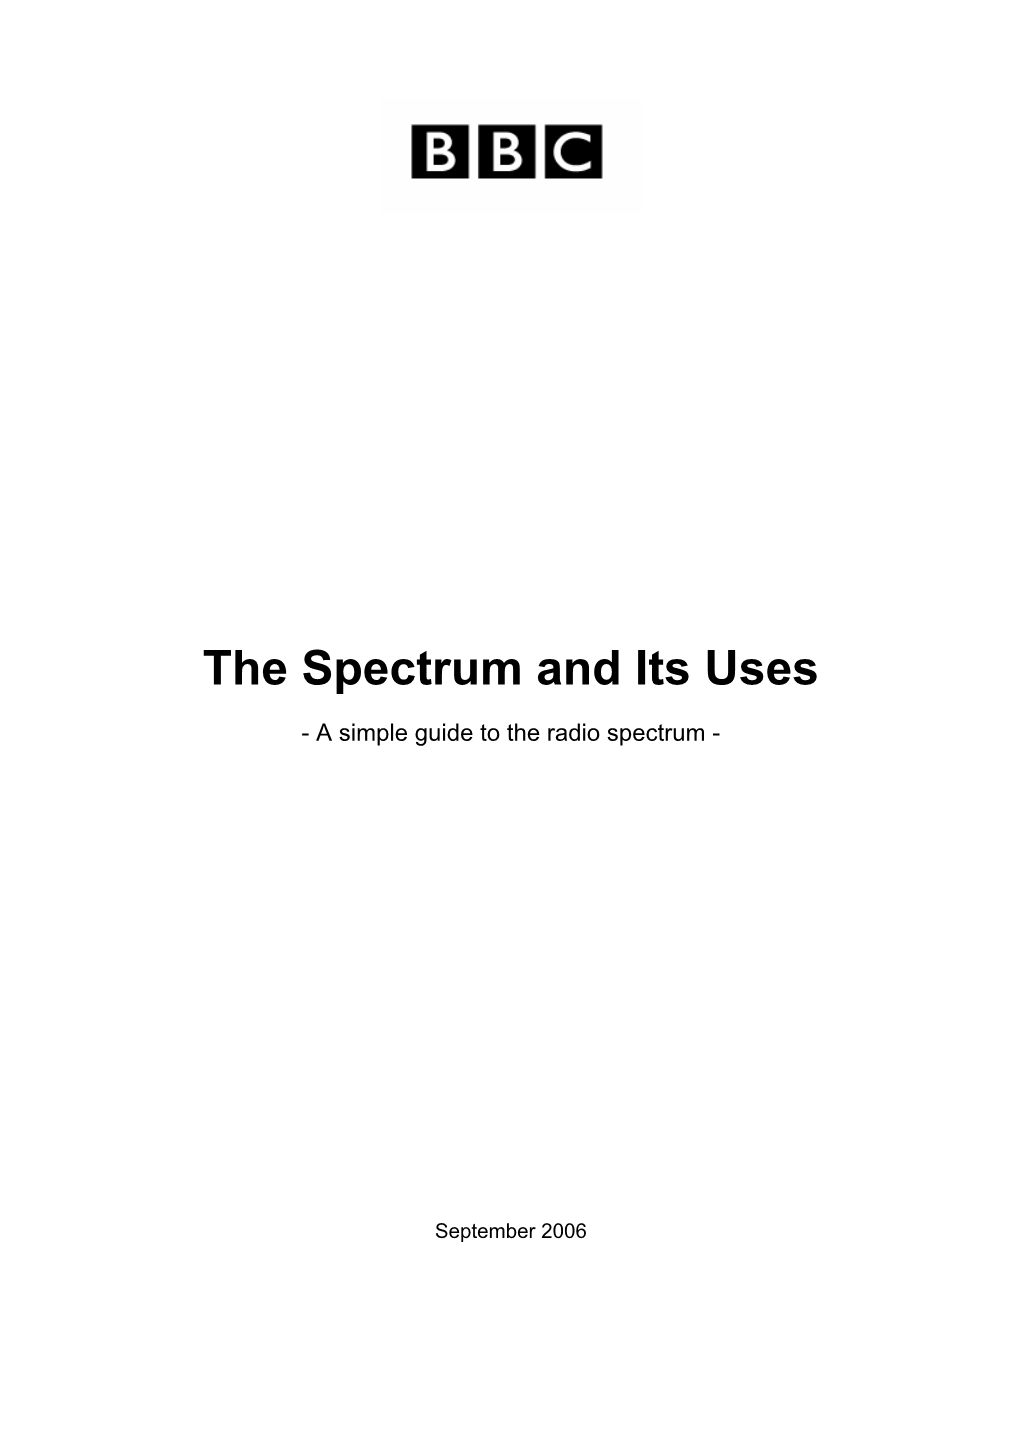 The Spectrum and Its Uses